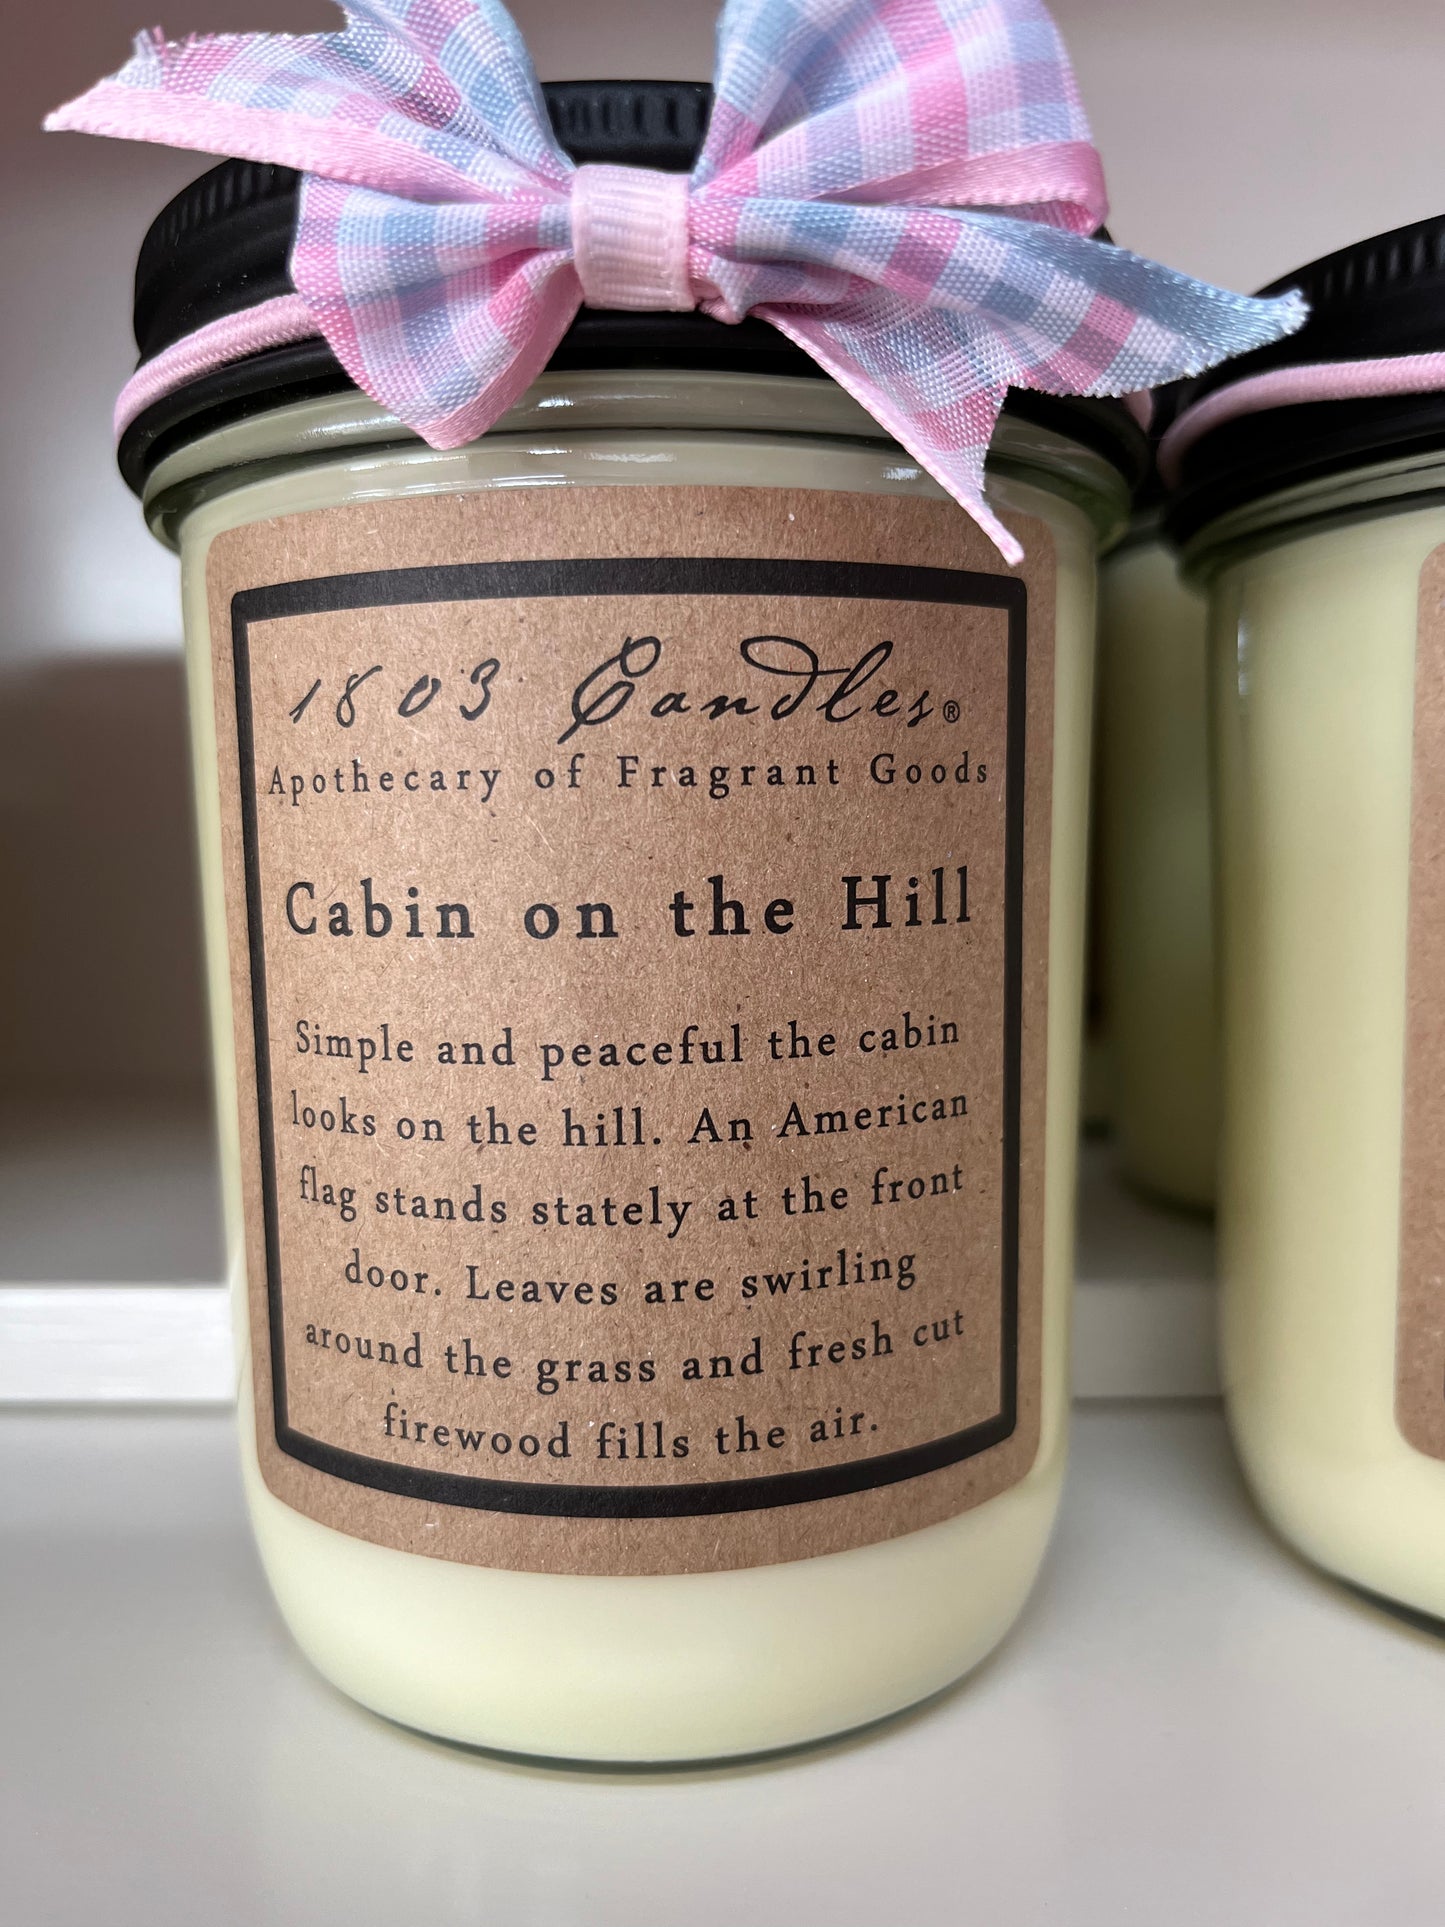 Cabin on the Hill 1803 Candle